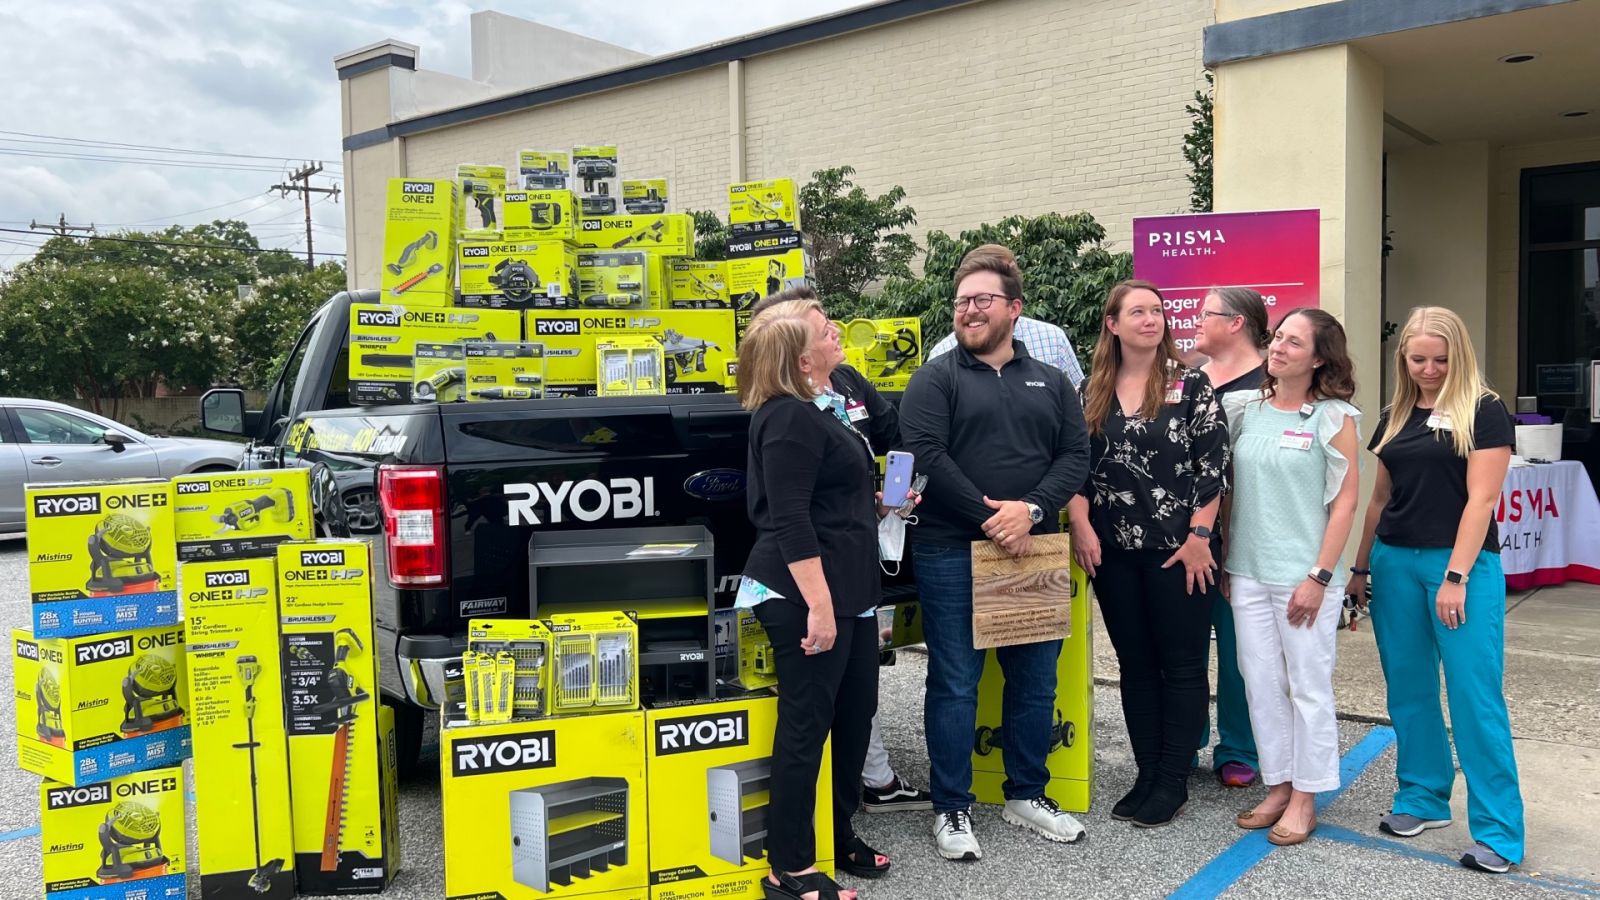 Ryobi Tool's Nico DiNunzio (in center with black shirt) is surrounded by Prisma Health's Roger C. Peace Rehabilitation Hospital staff as they receive $4,000-worth of Ryobi tools. (Photo/Provided)